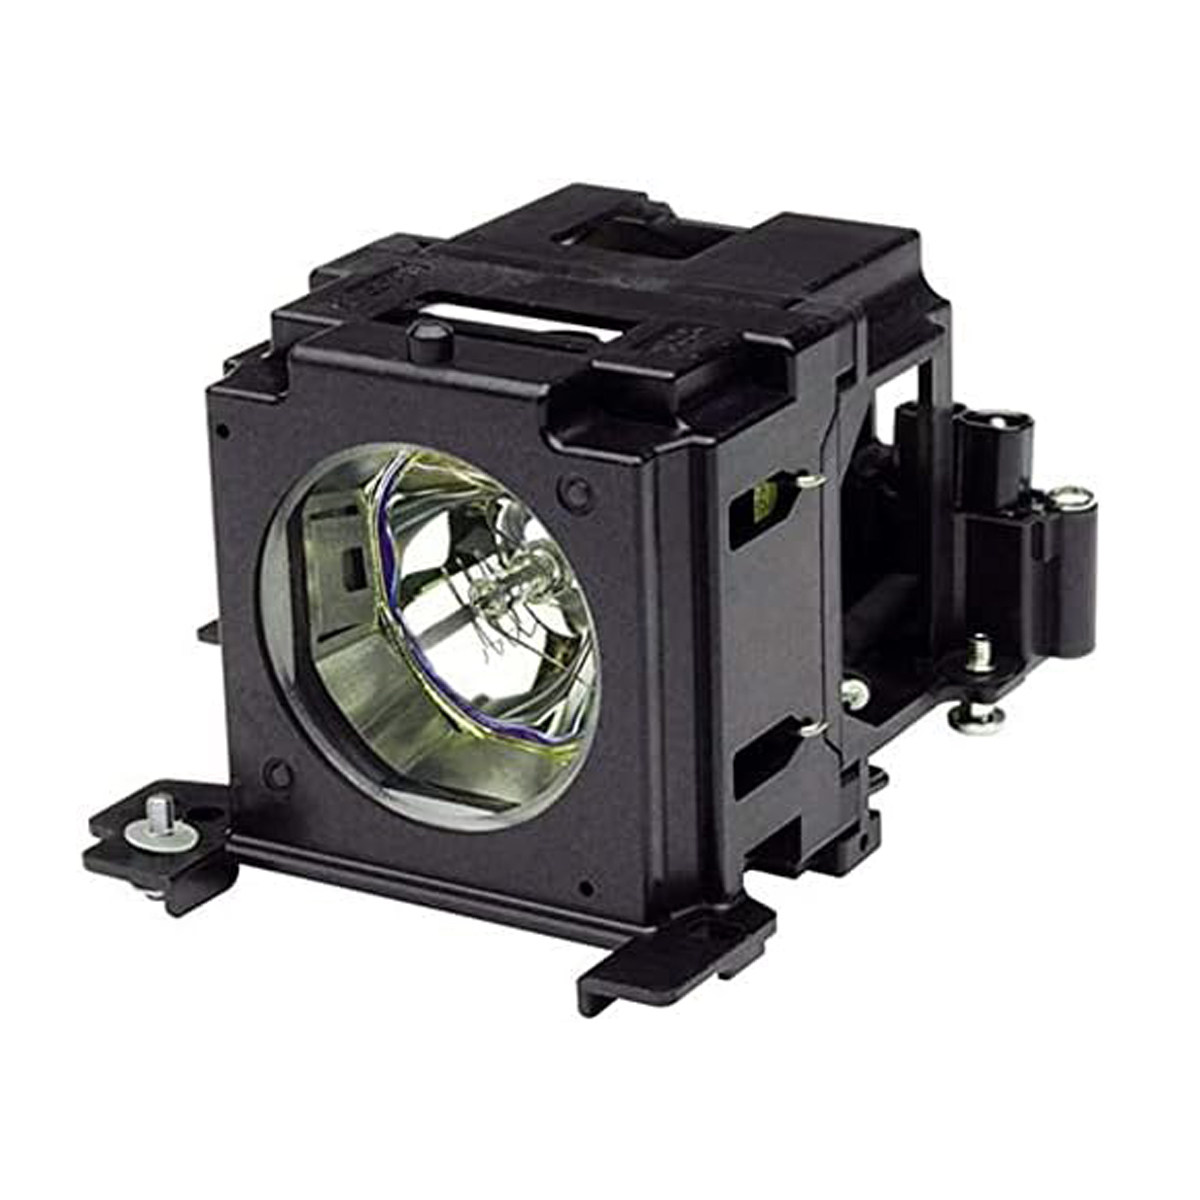 Replacement Projector lamp 78-6969-9861-2 For 3M S55I X55i